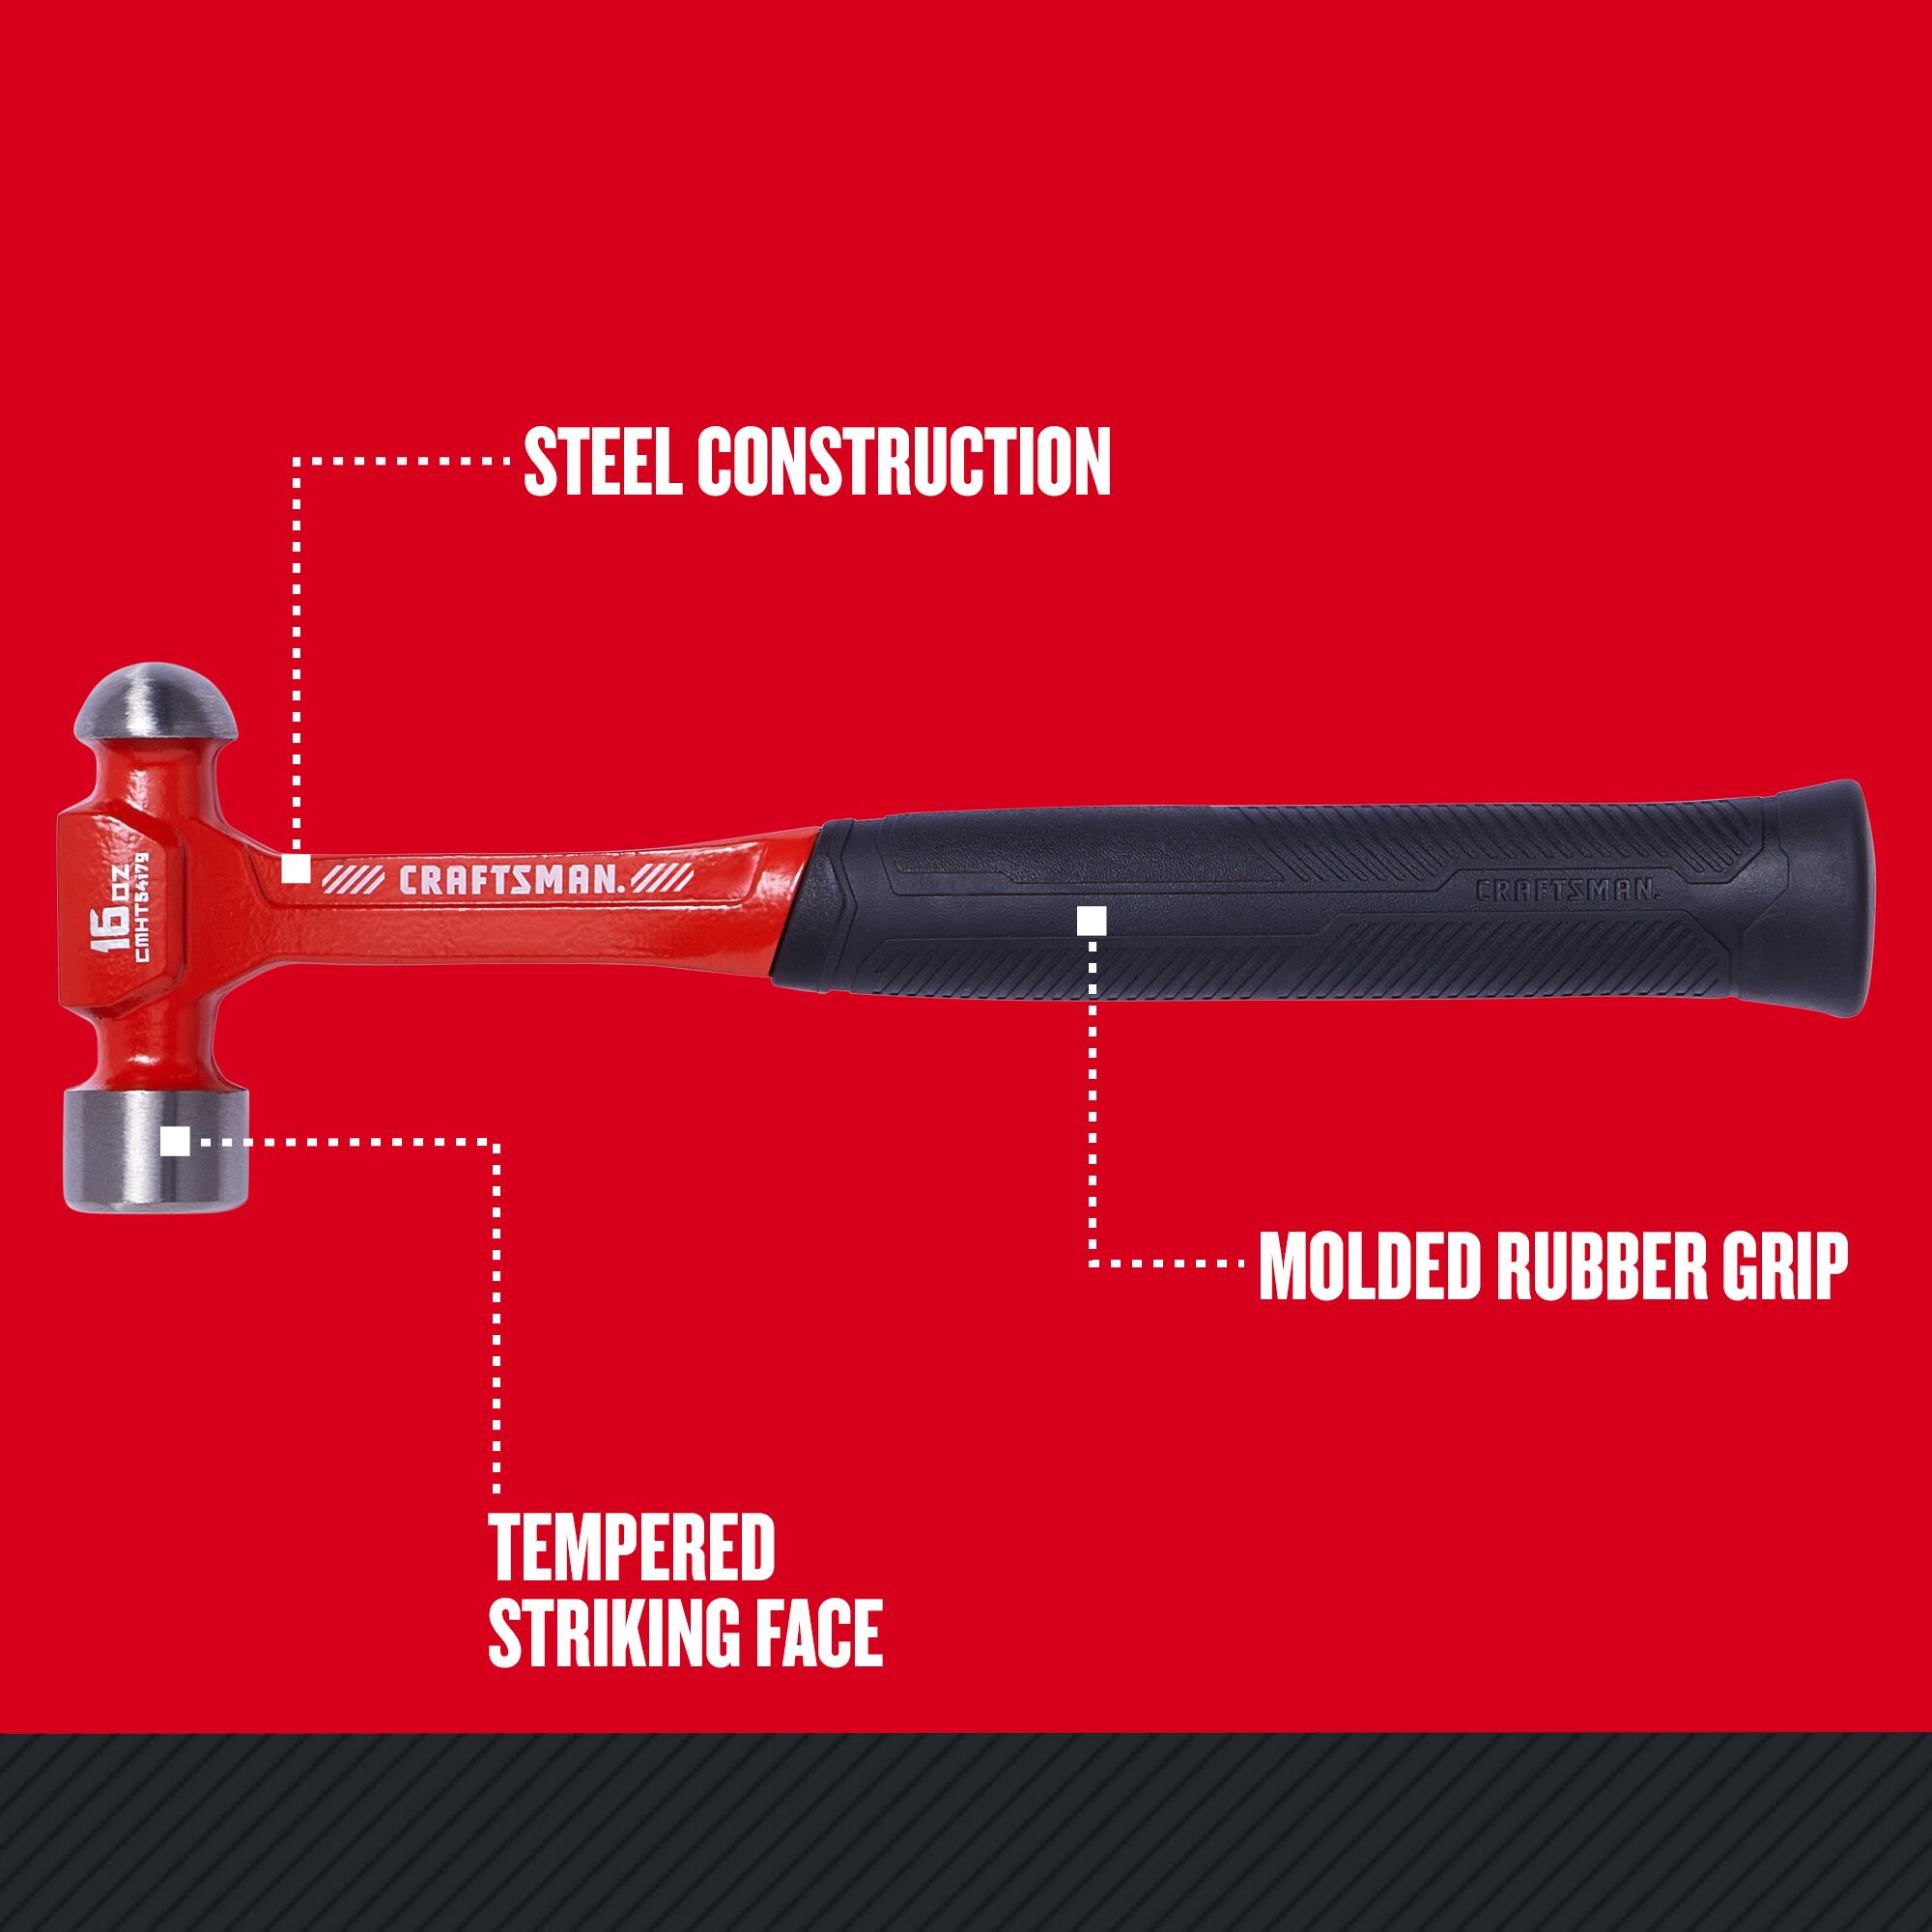 Graphic of CRAFTSMAN Hammers: One-Piece Steel highlighting product features